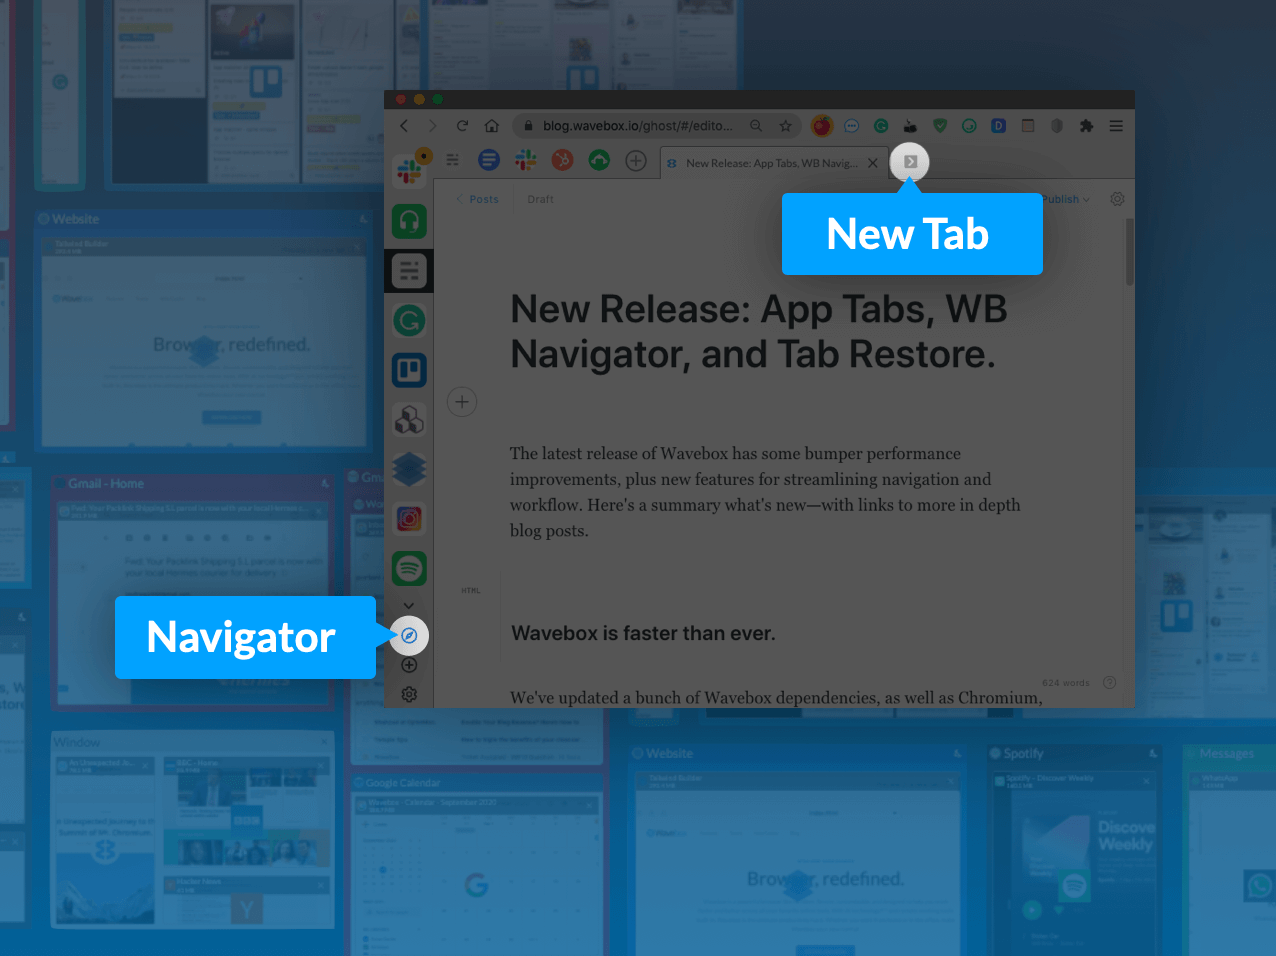 New Release: App Tabs, Navigator, and Restore.